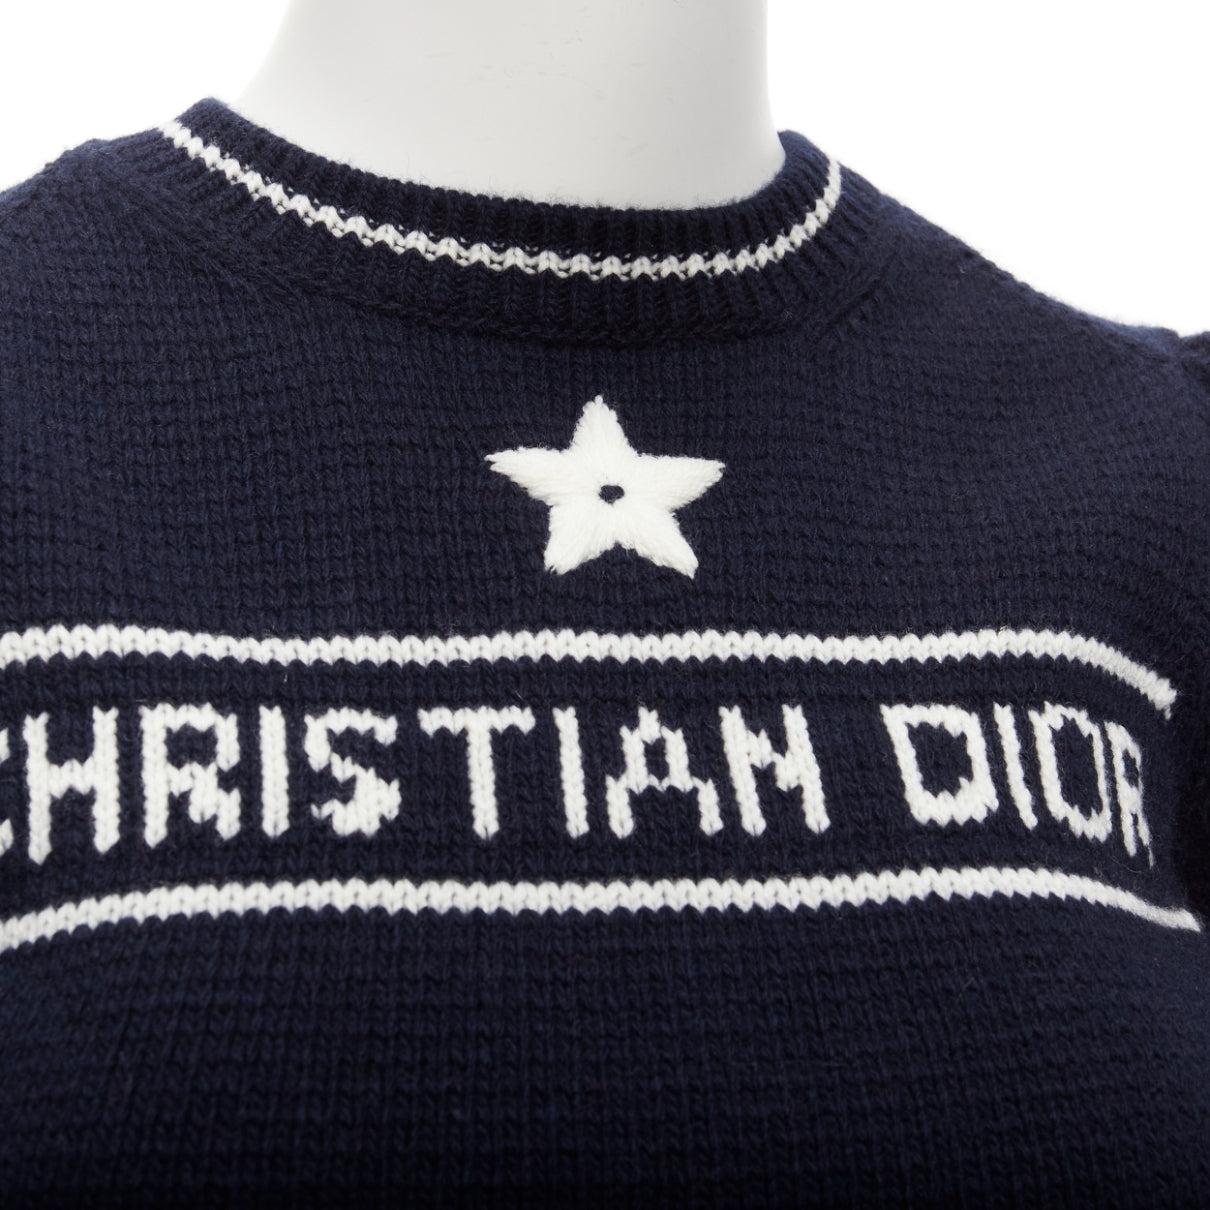 CHRISTIAN DIOR 2022 100% cashmere navy white puff sleeve crew crop sweater FR34 XXS
Reference: AAWC/A00829
Brand: Dior
Designer: Maria Grazia Chiuri
Collection: 2022
Material: Wool, Cashmere
Color: Navy, White
Pattern: Solid
Closure: Slip On
Made